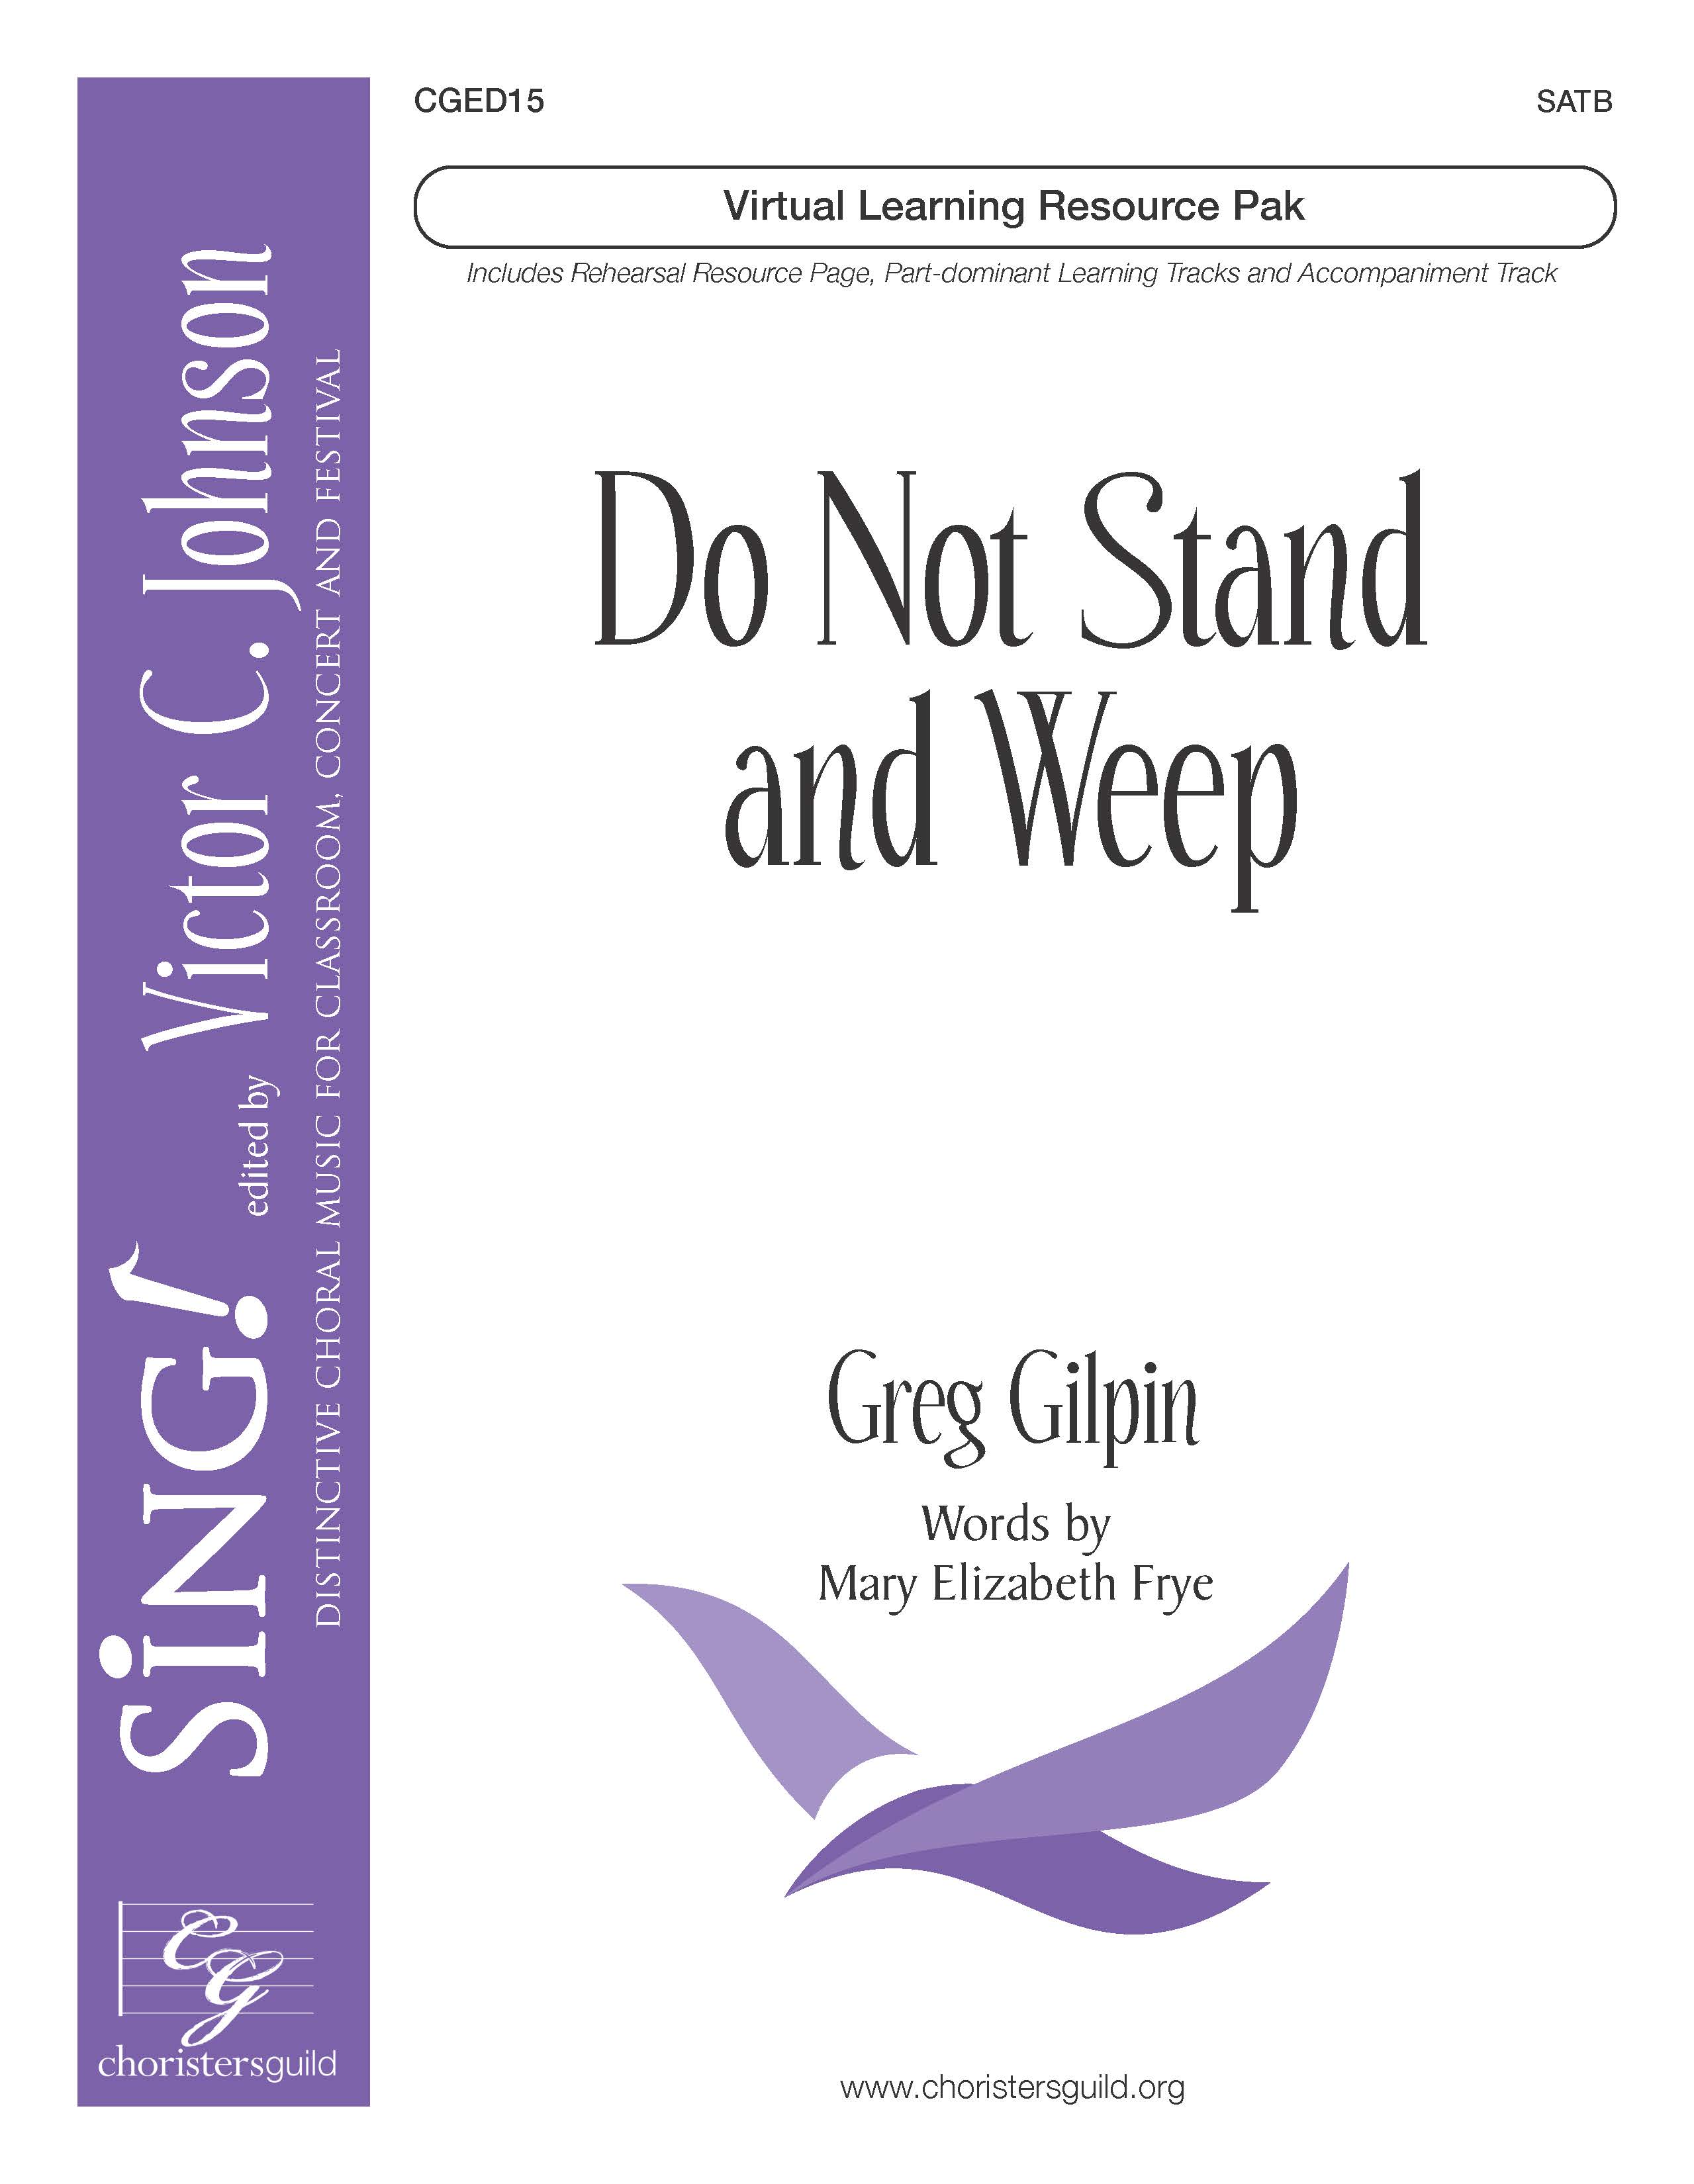 Do Not Stand and Weep (Virtual Learning Resource Pak) - SATB